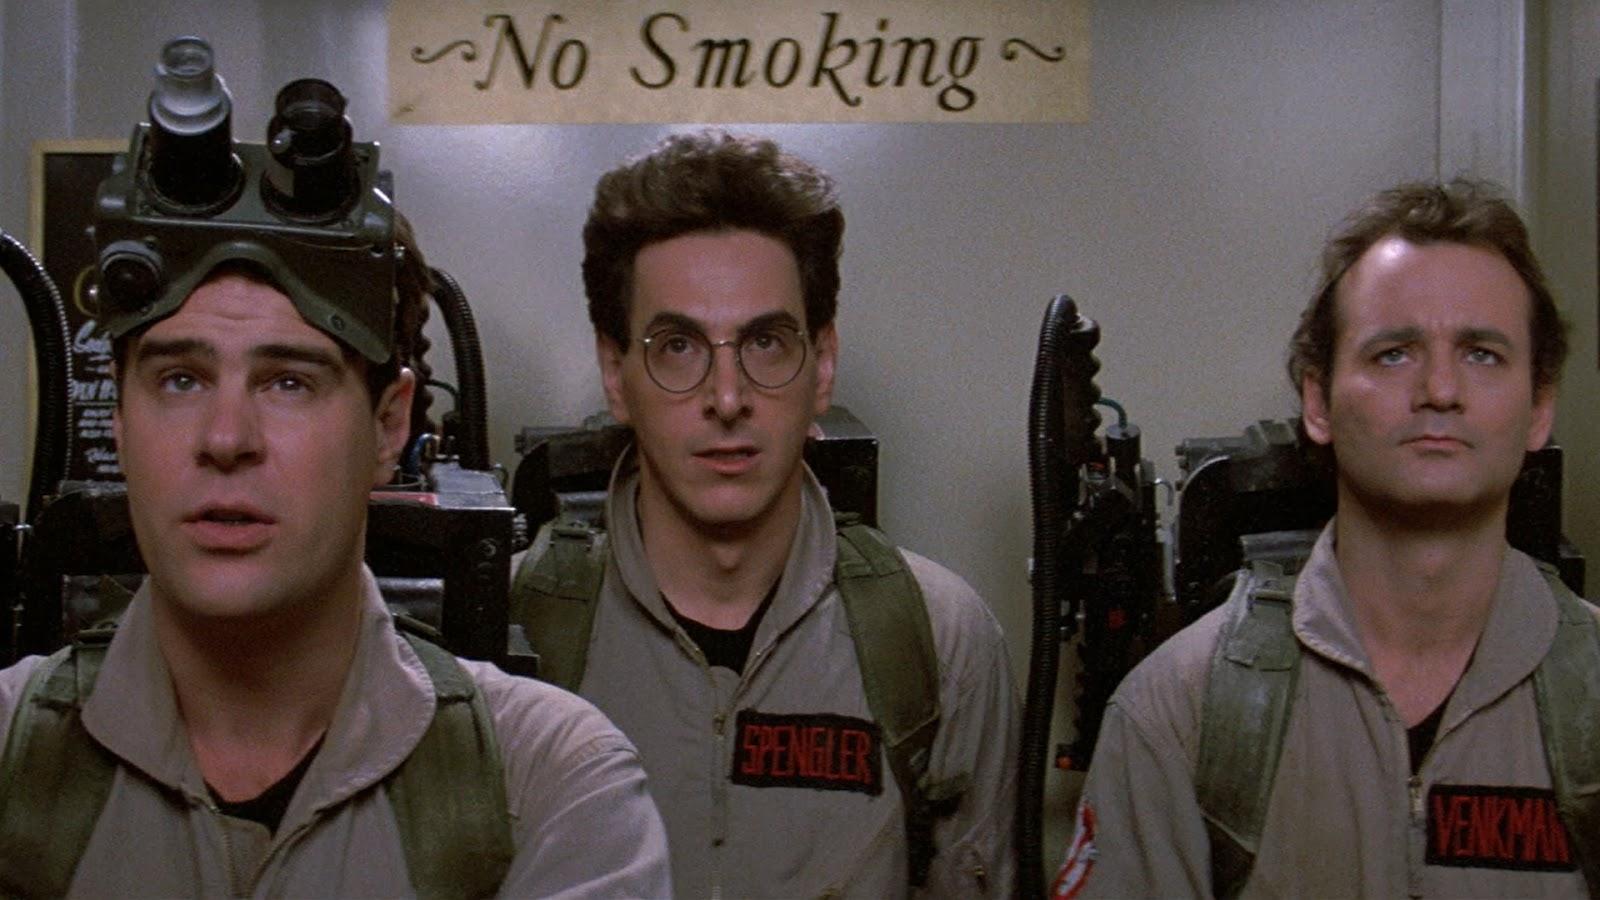 Ghostbusters Props and Memorabilia Are Up For Auction Through March